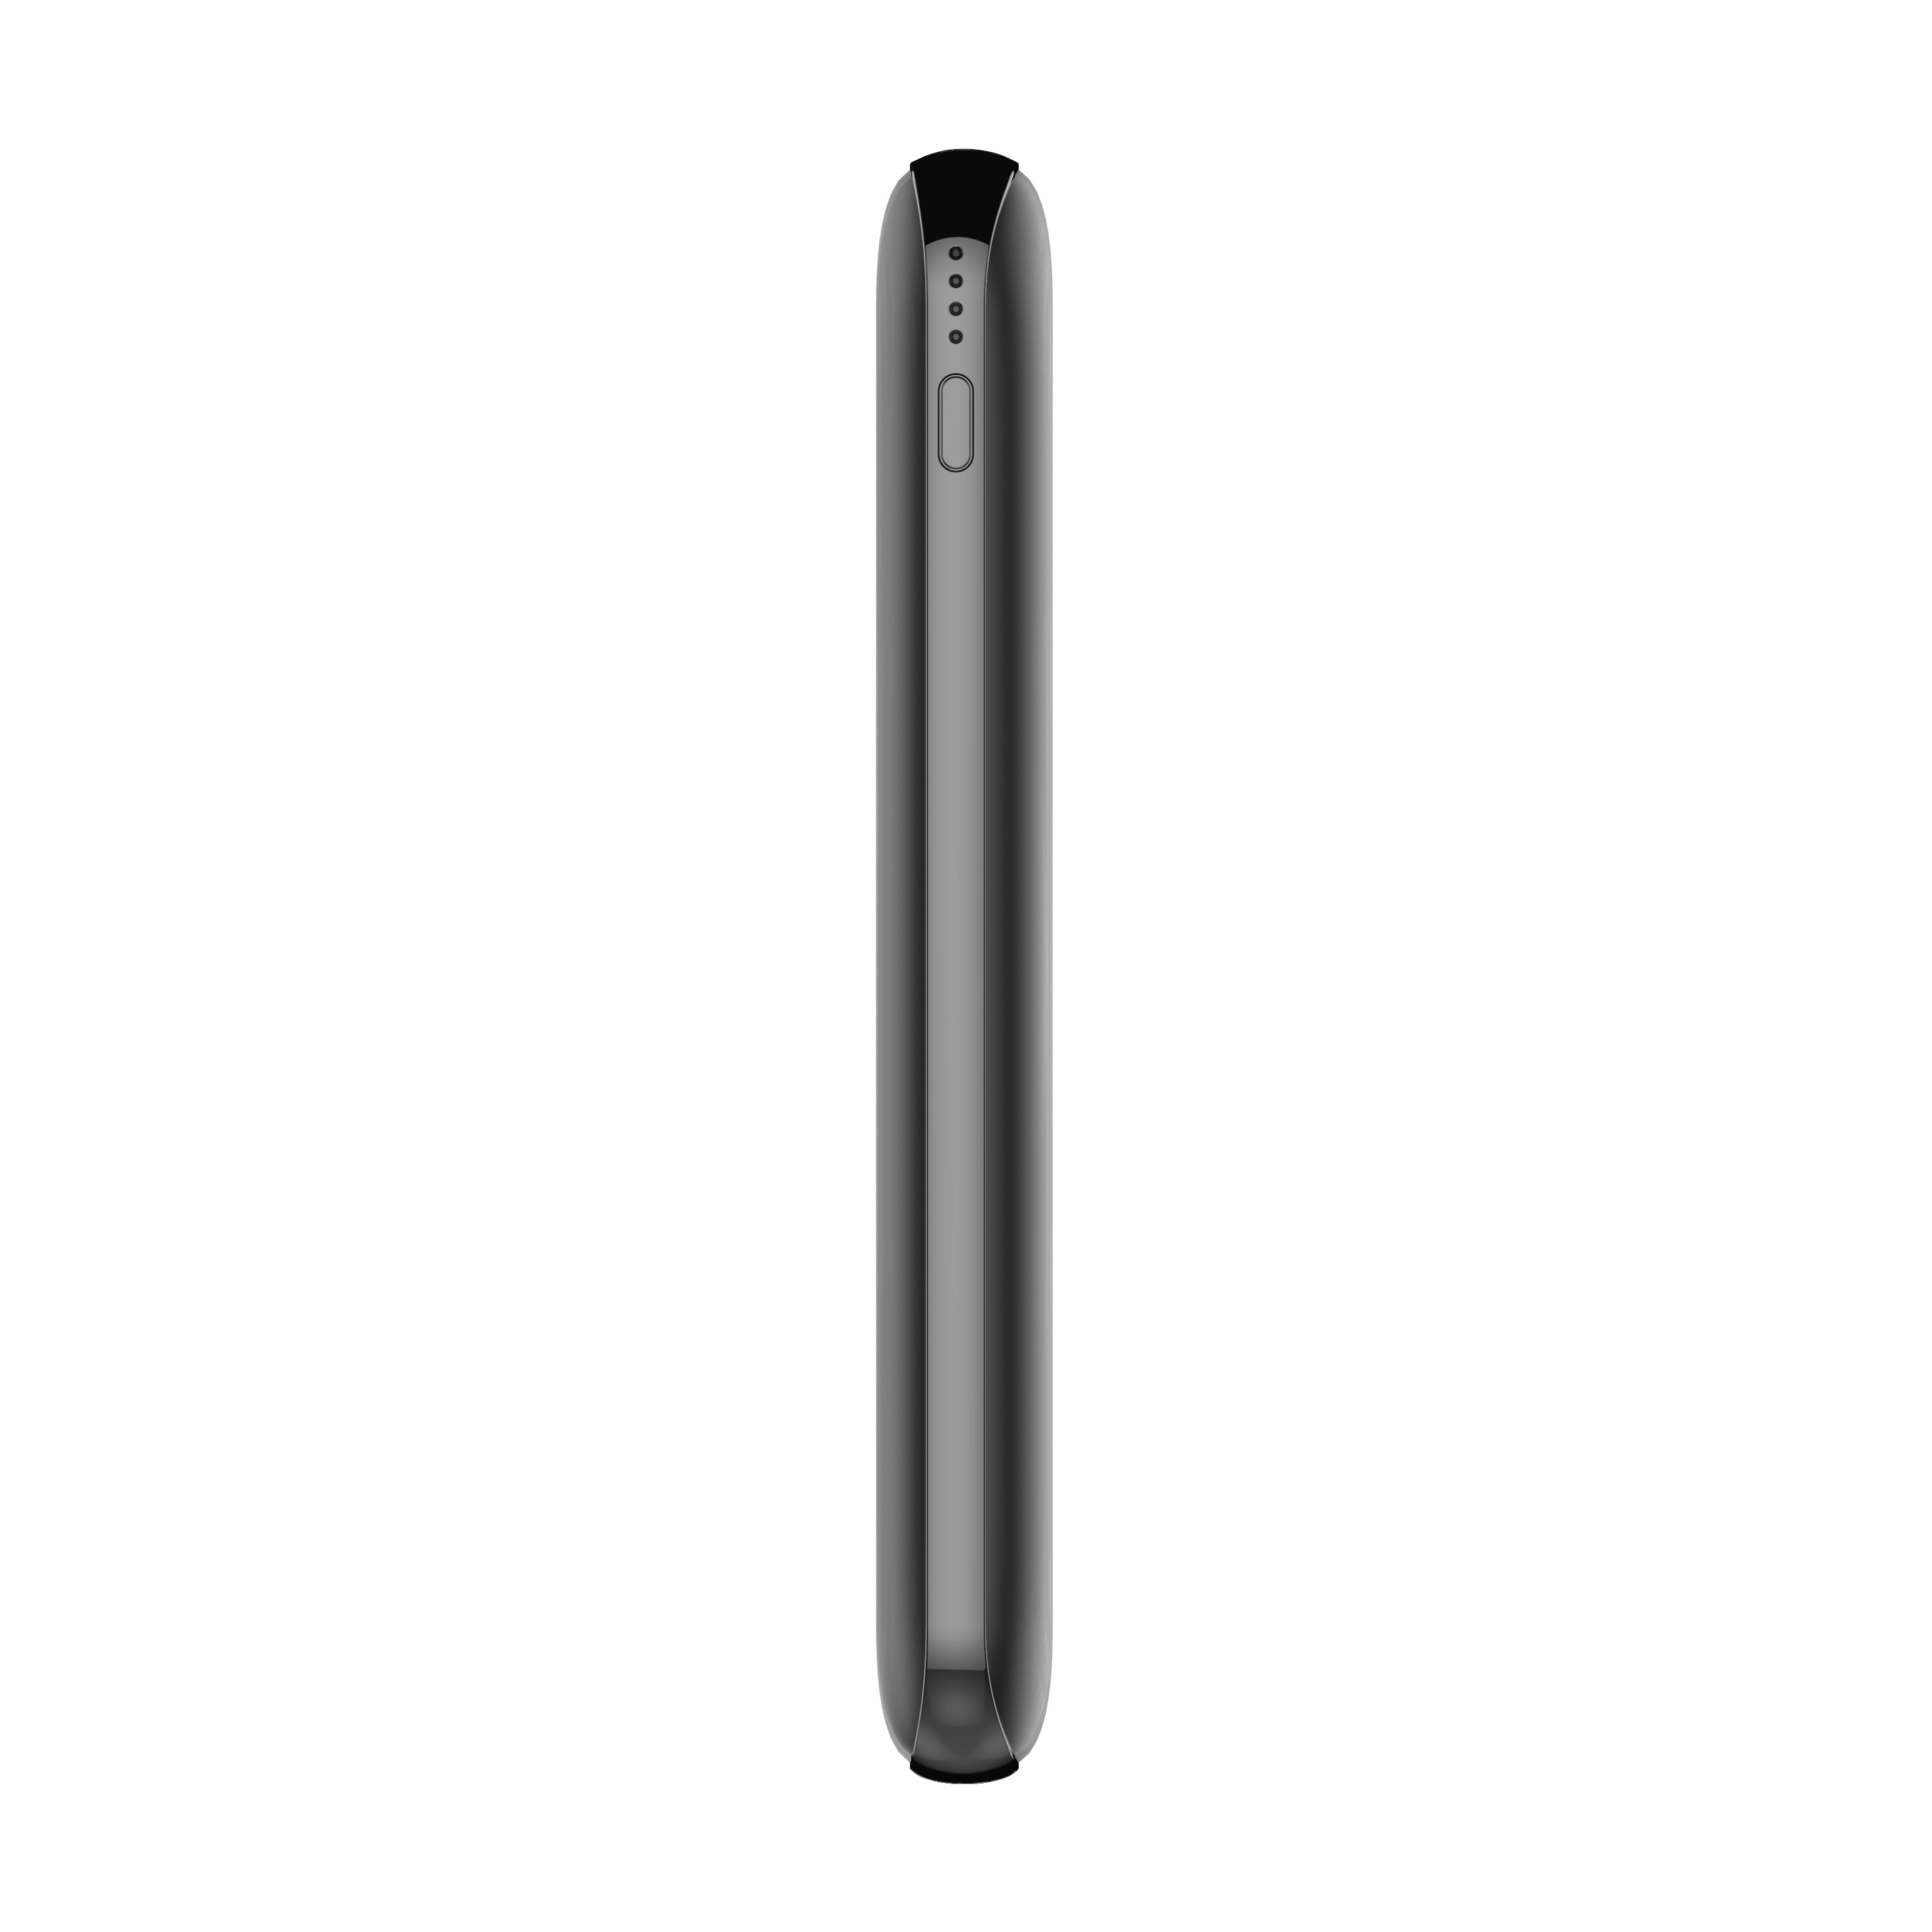 REF Power Fast Charge "C-Port" Portable Power Bank Black side